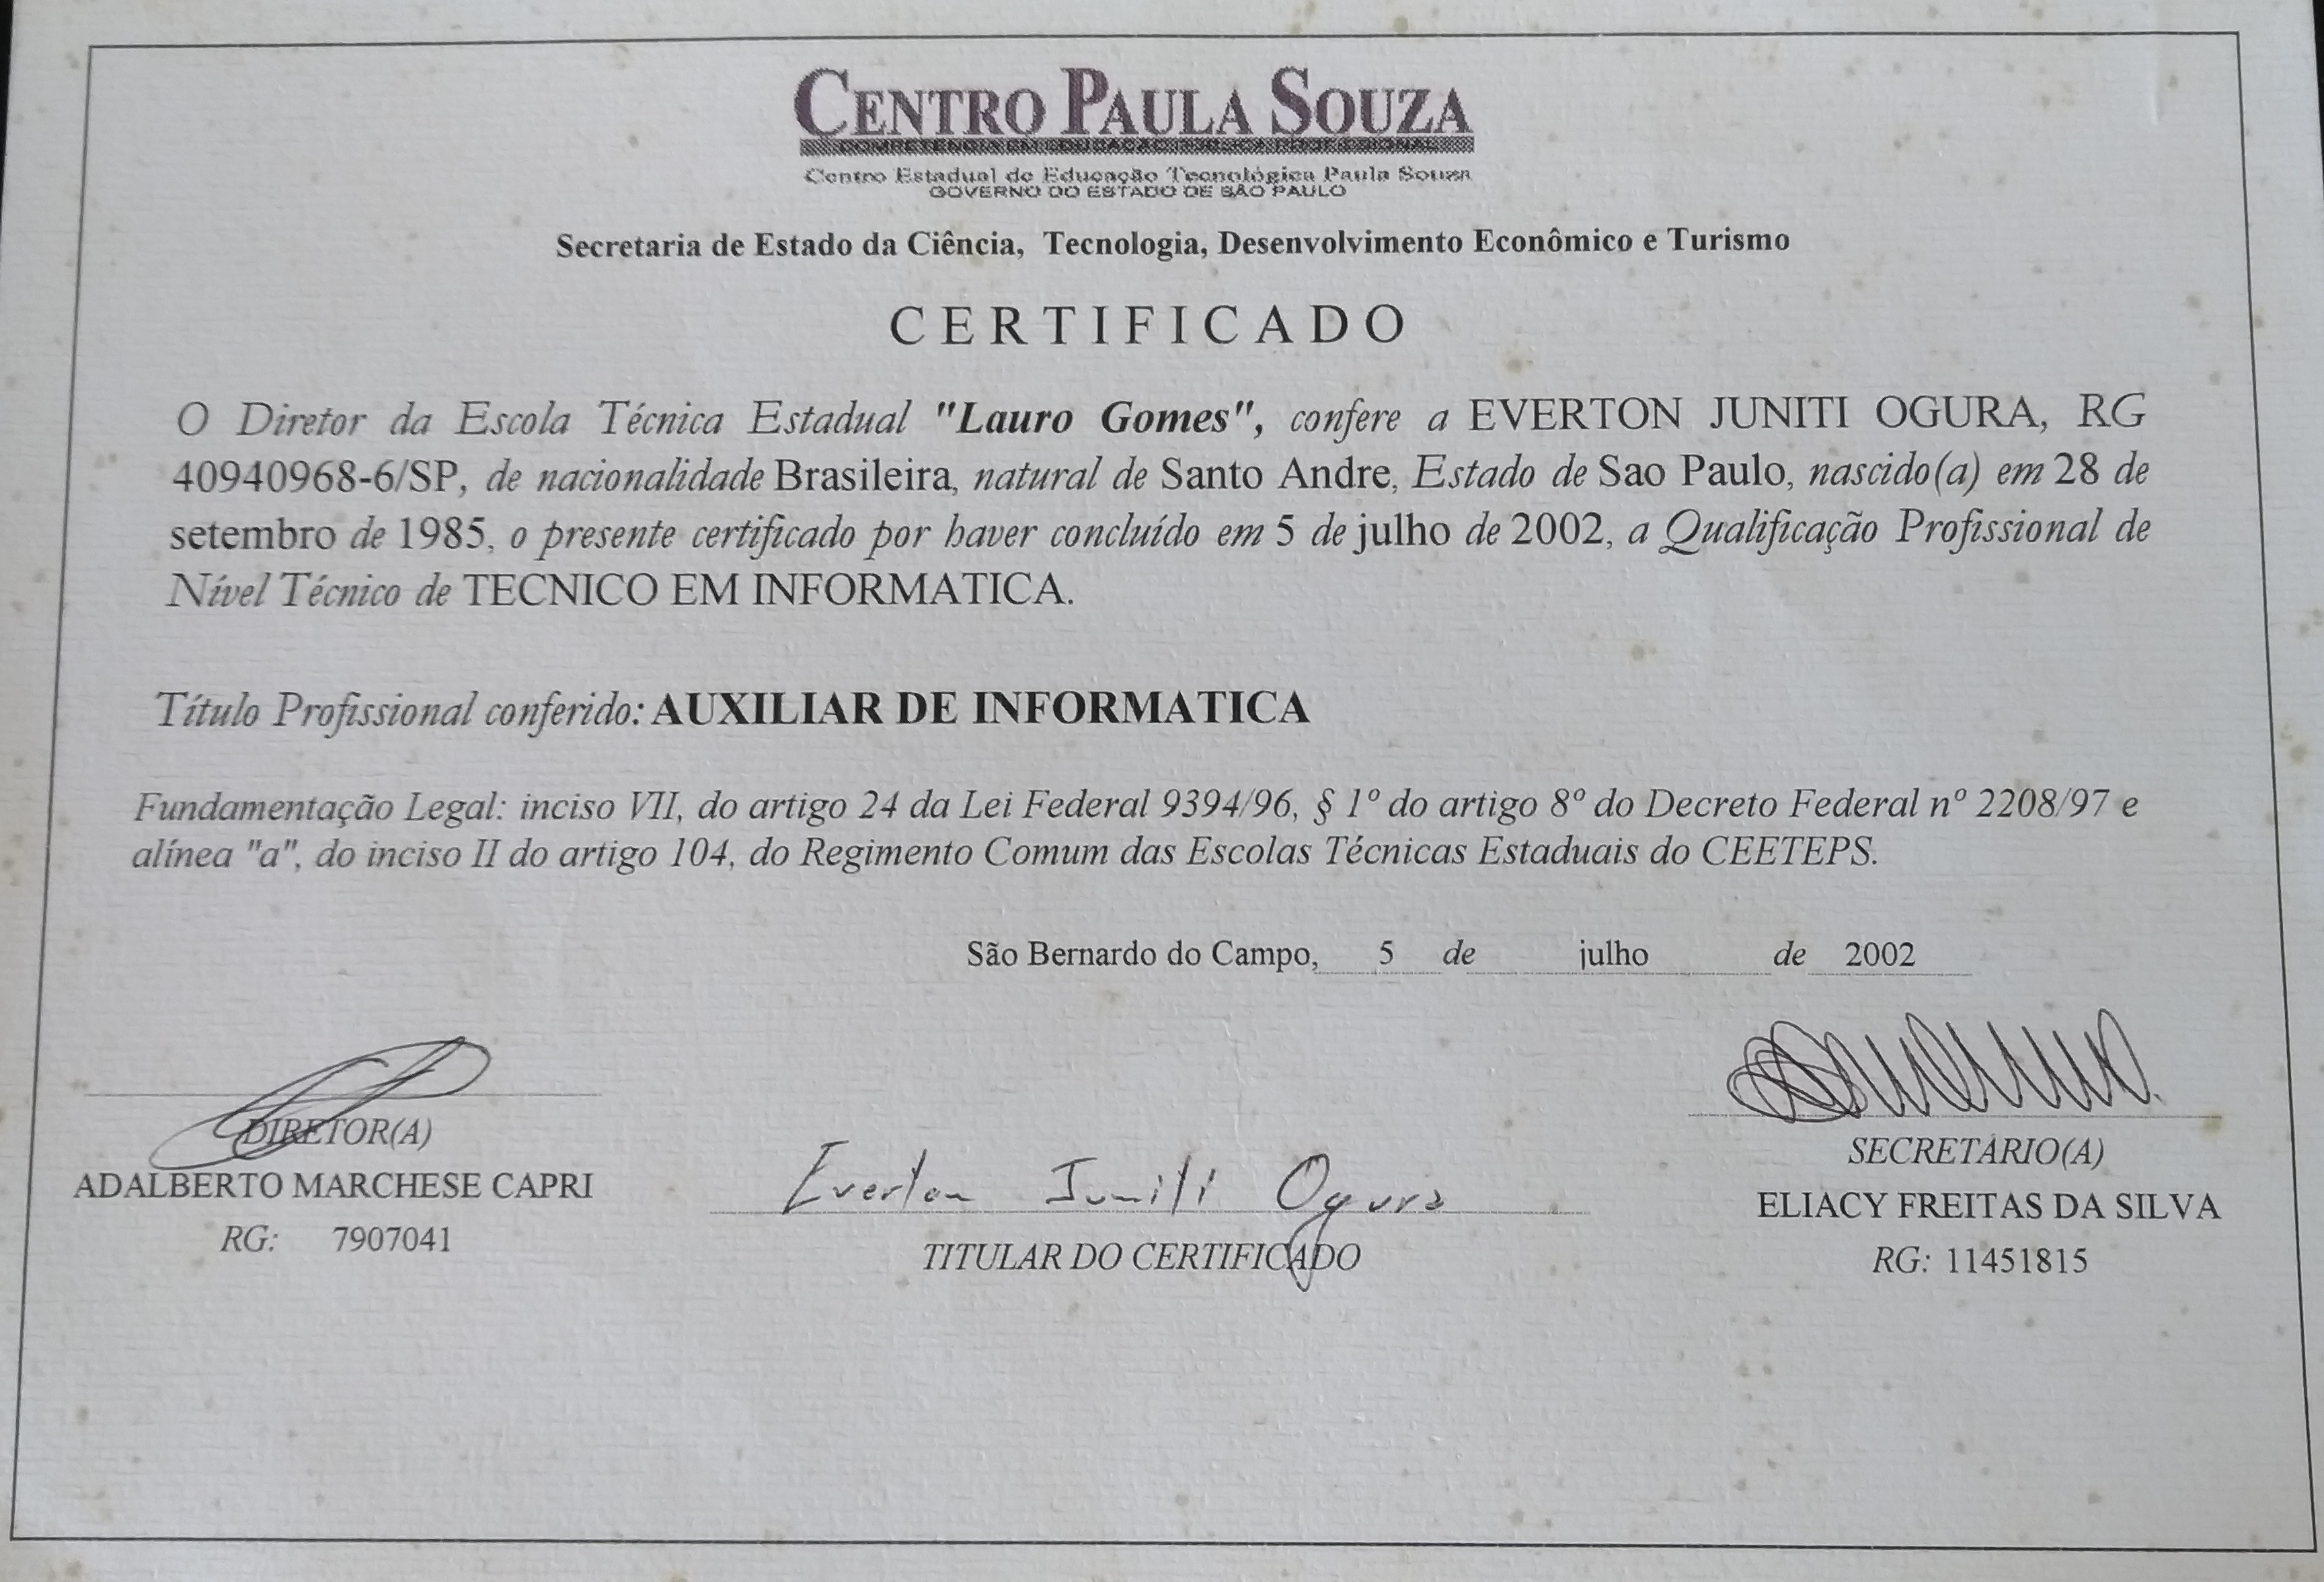 Image of the diploma of technical education in Informatics